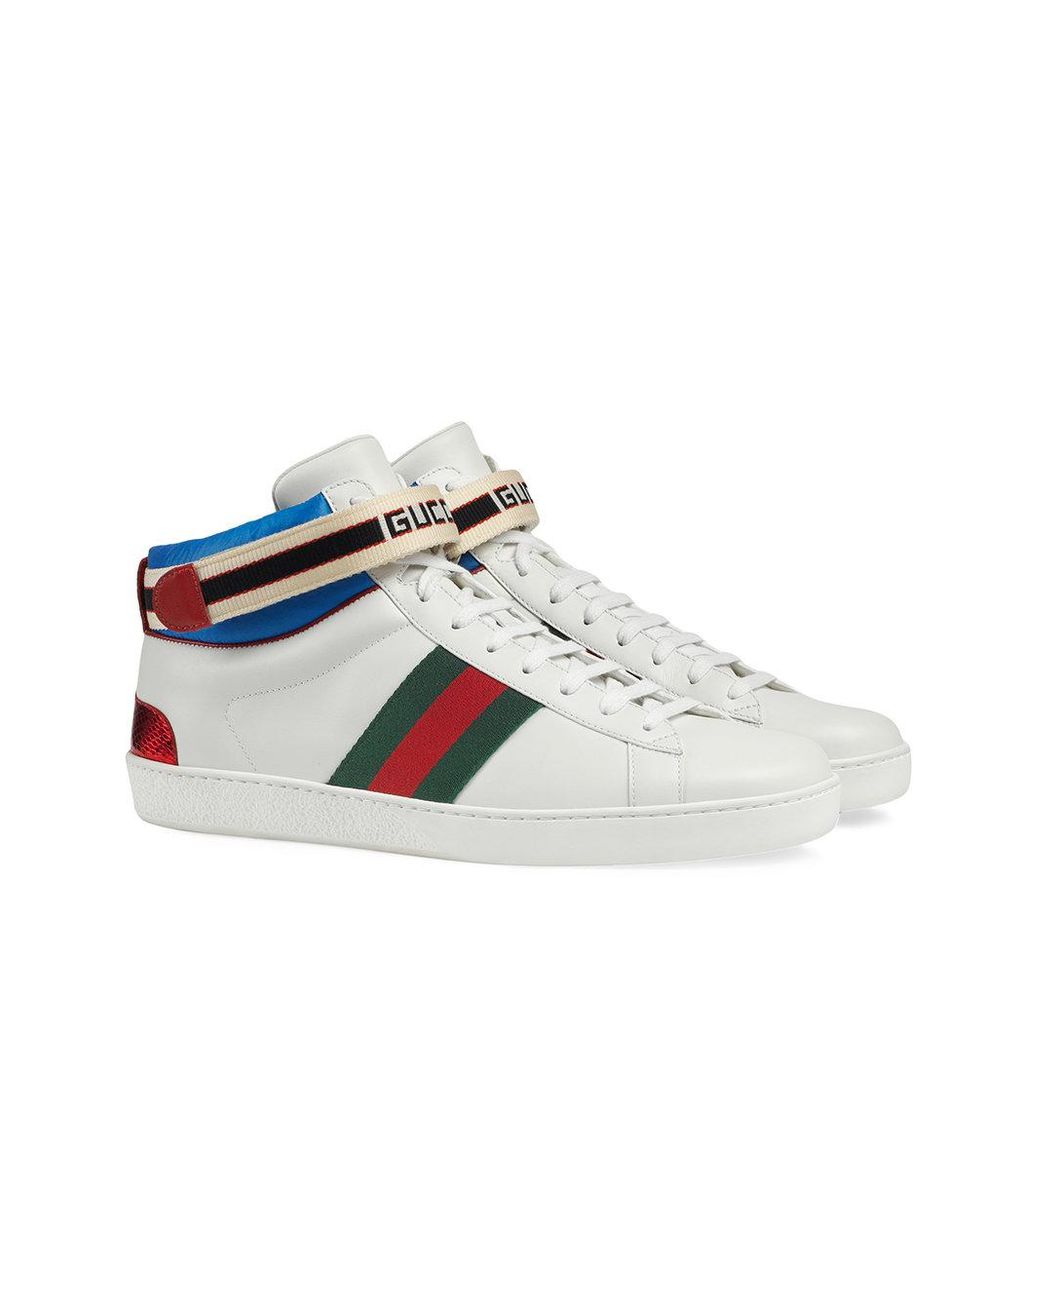 Gucci Leather Ace Stripe High-top 